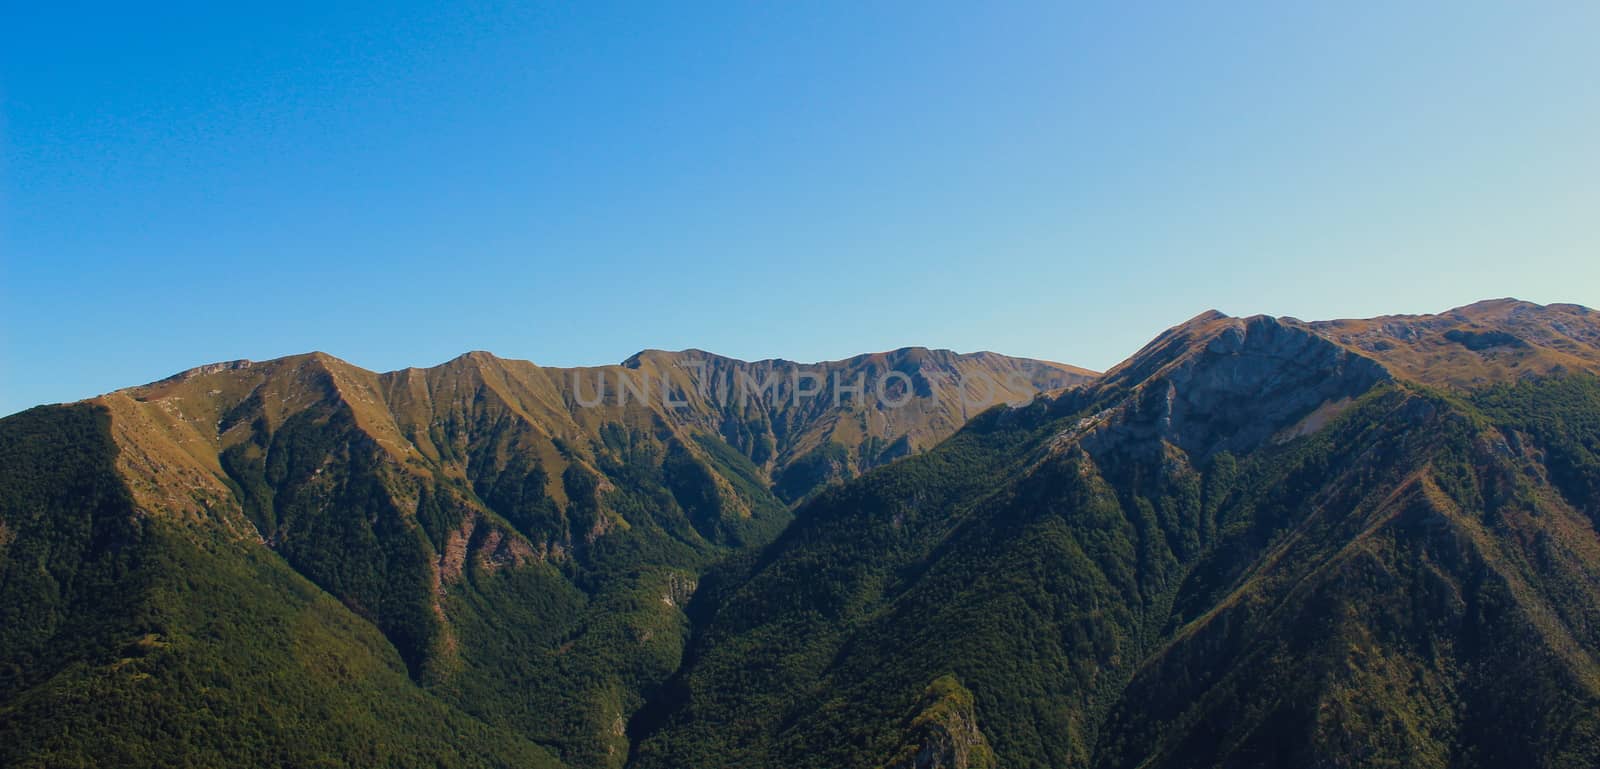 Above the old Bosnian village of Lukomir are beautiful mountains with no vegetation mountain peaks. by mahirrov